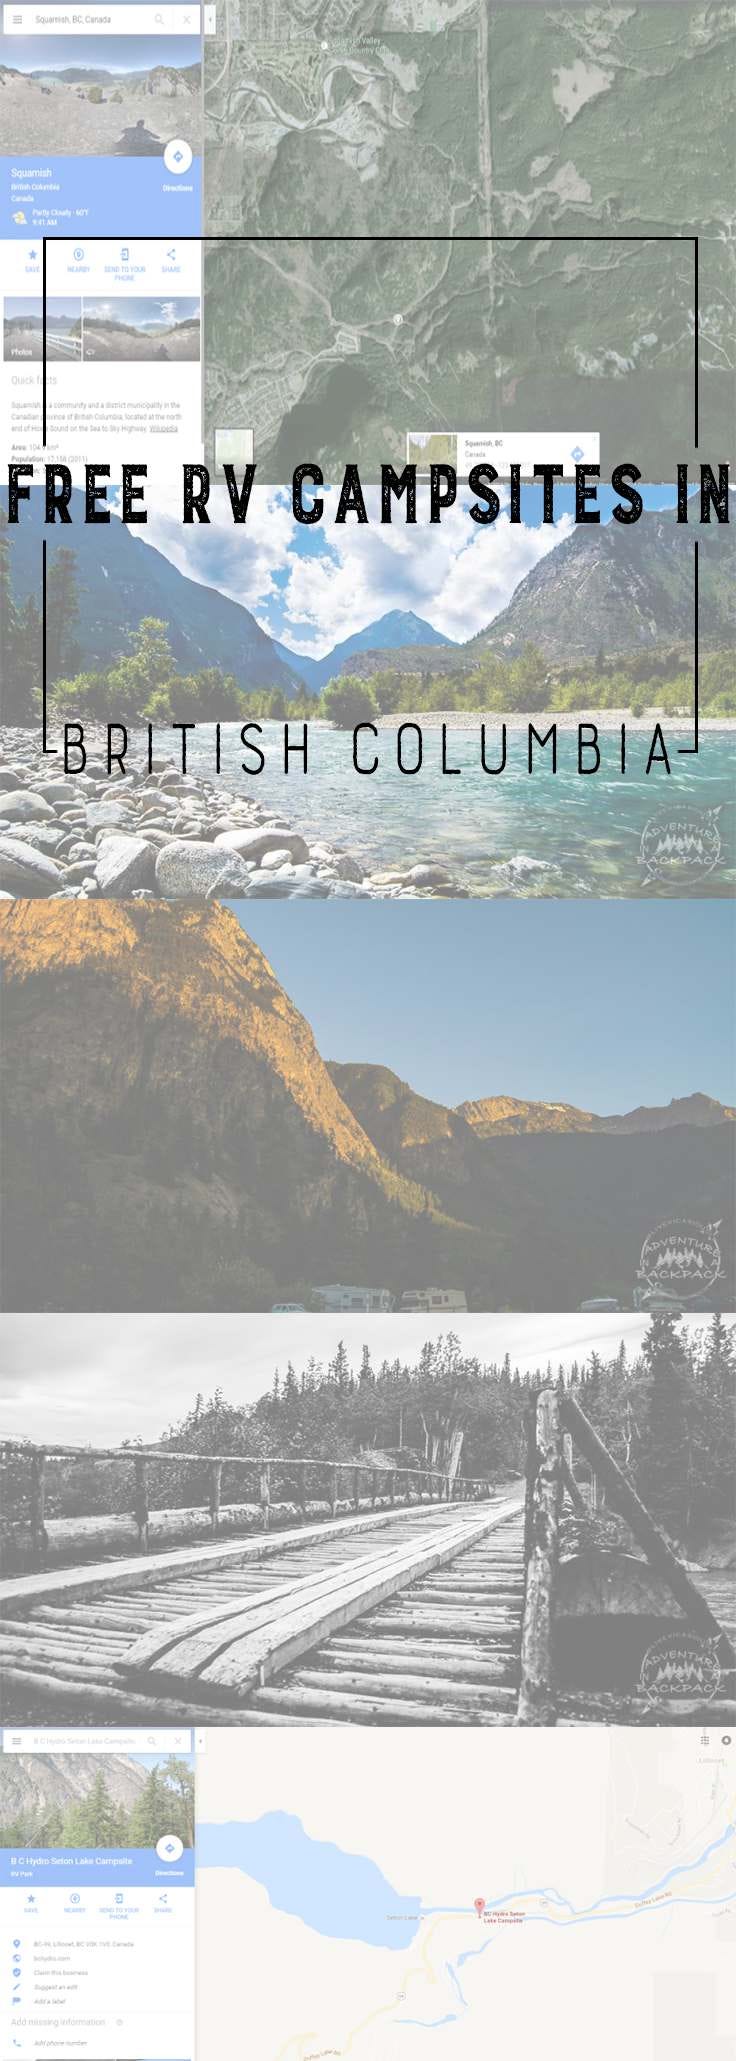 We found SEVERAL free options for free camping in our RV in British columbia on our way back from Alaska.  Glamping | Free Campsites | Canada Campsites | British Columbia Campsites